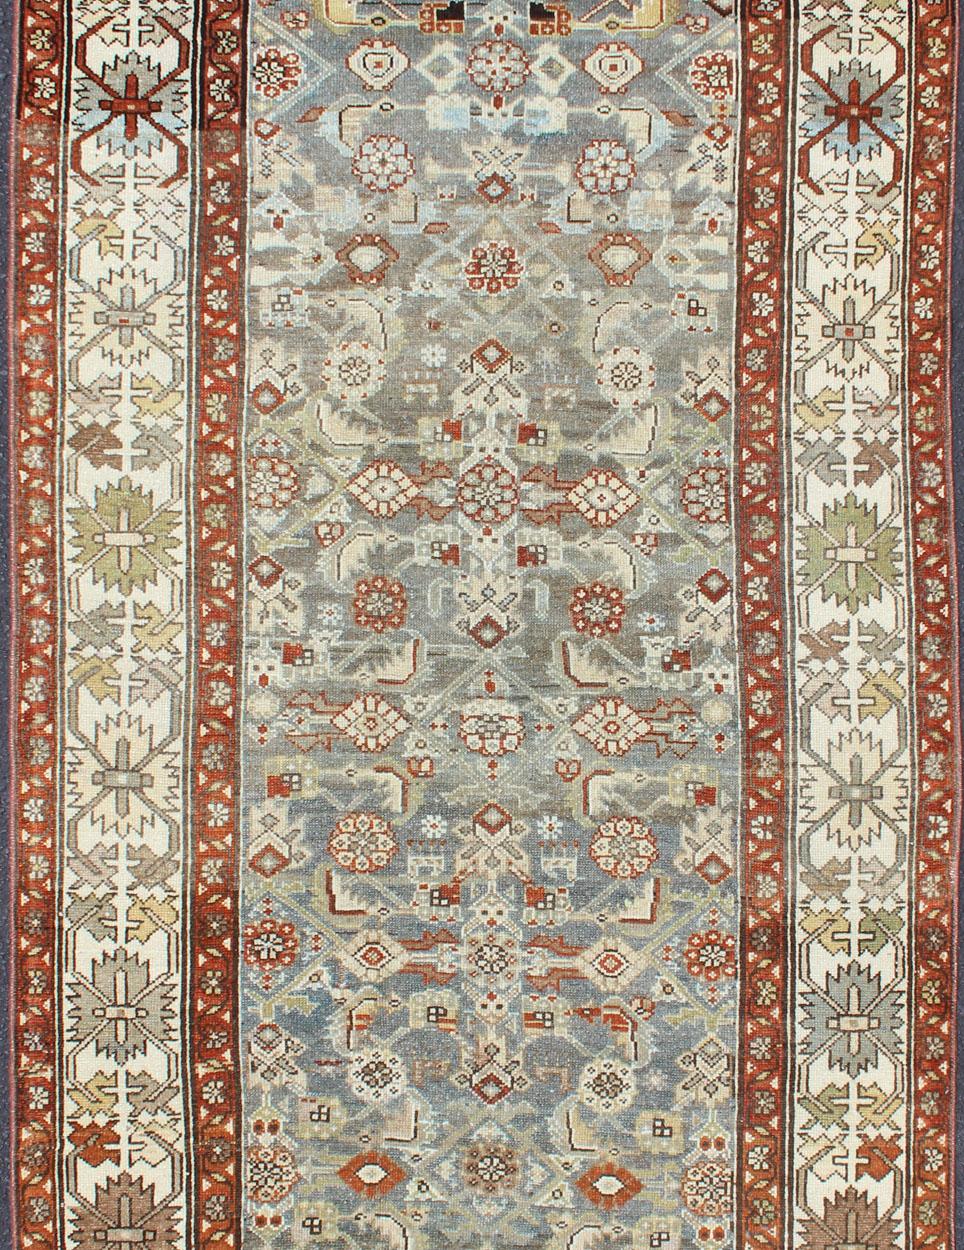 Light gray background and terracotta red guard border, with all-over tribal design, Persian antique Malayer rug, rug SUS-2007-226, country of origin / type: Iran / Malayer, circa 1920.

This beautiful antique early 20th century Persian Malayer